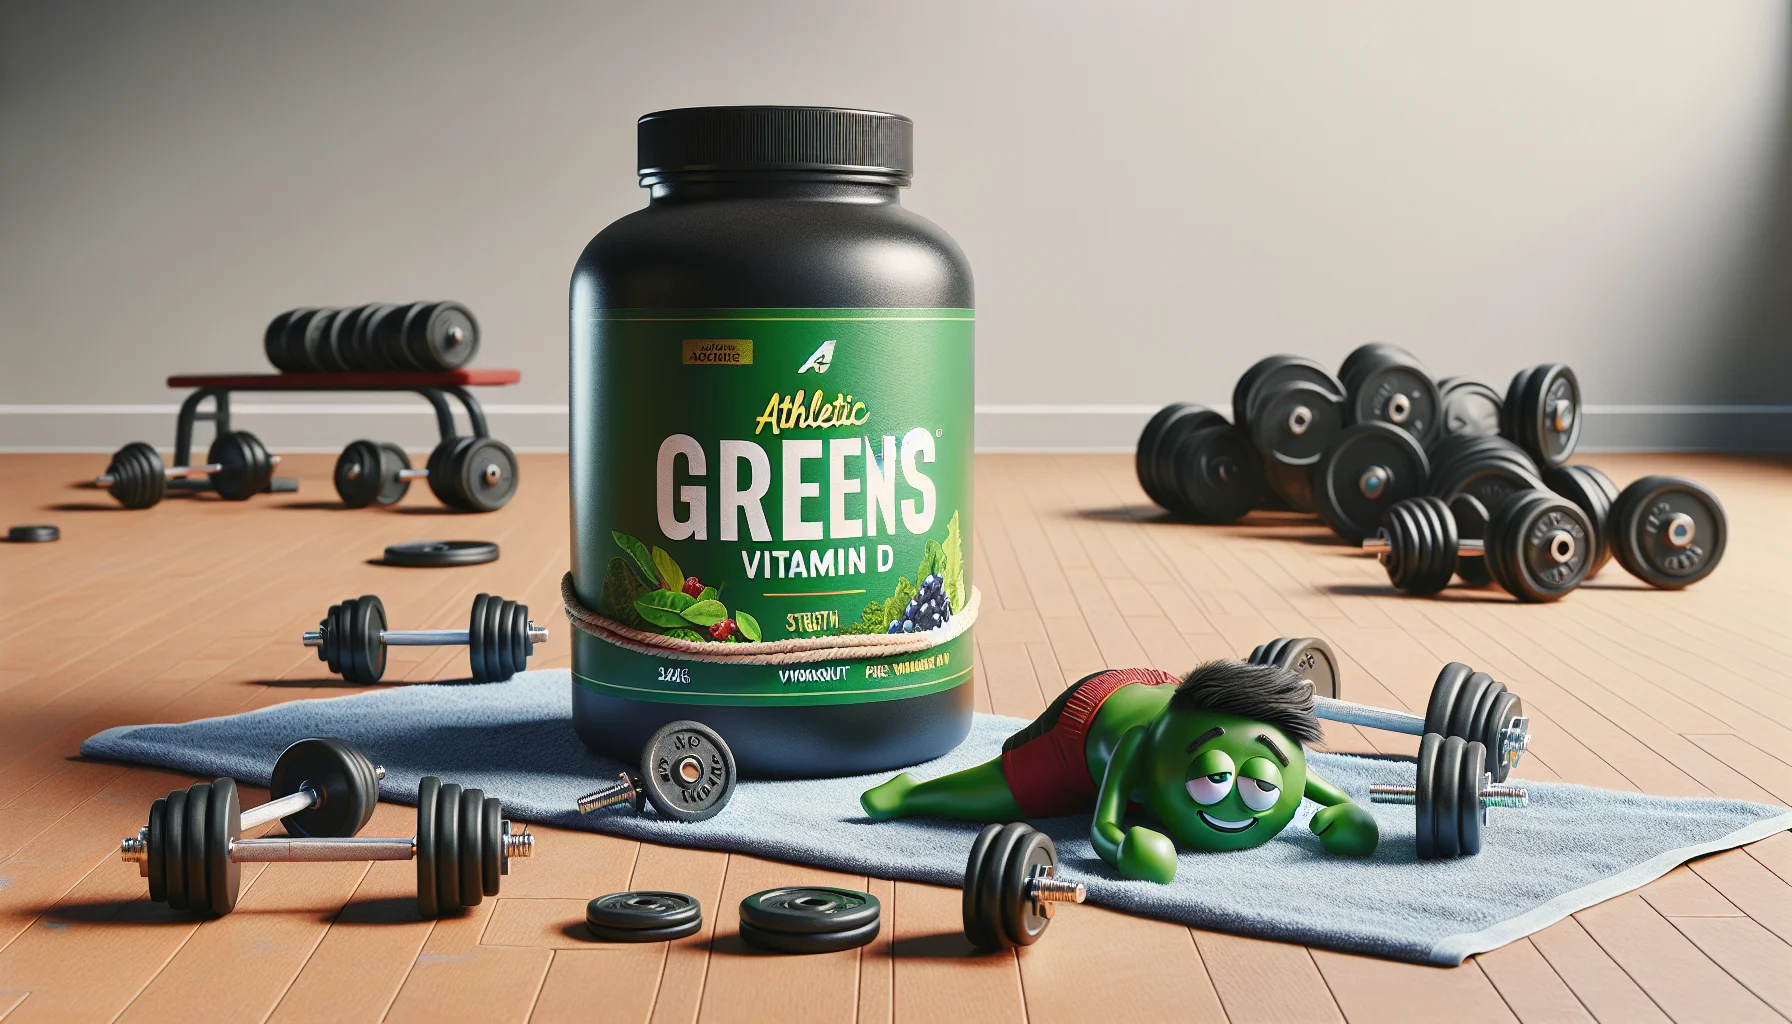 Create a detailed and photorealistic image of a bottle labeled 'Athletic Greens Vitamin D' involved in a humorous scenario. It's on a gym floor surrounded by tiny dumbbells and weight plates, as if it's just completed a strength workout. Nearby, there's another bottle labelled 'Pre-Workout', looking exhausted and sprawled out on a gym towel. This whimsical scene depicts the 'Athletic Greens Vitamin D' as a fit and energetic entity, thereby encouraging viewers to consider taking supplements for sports activities.